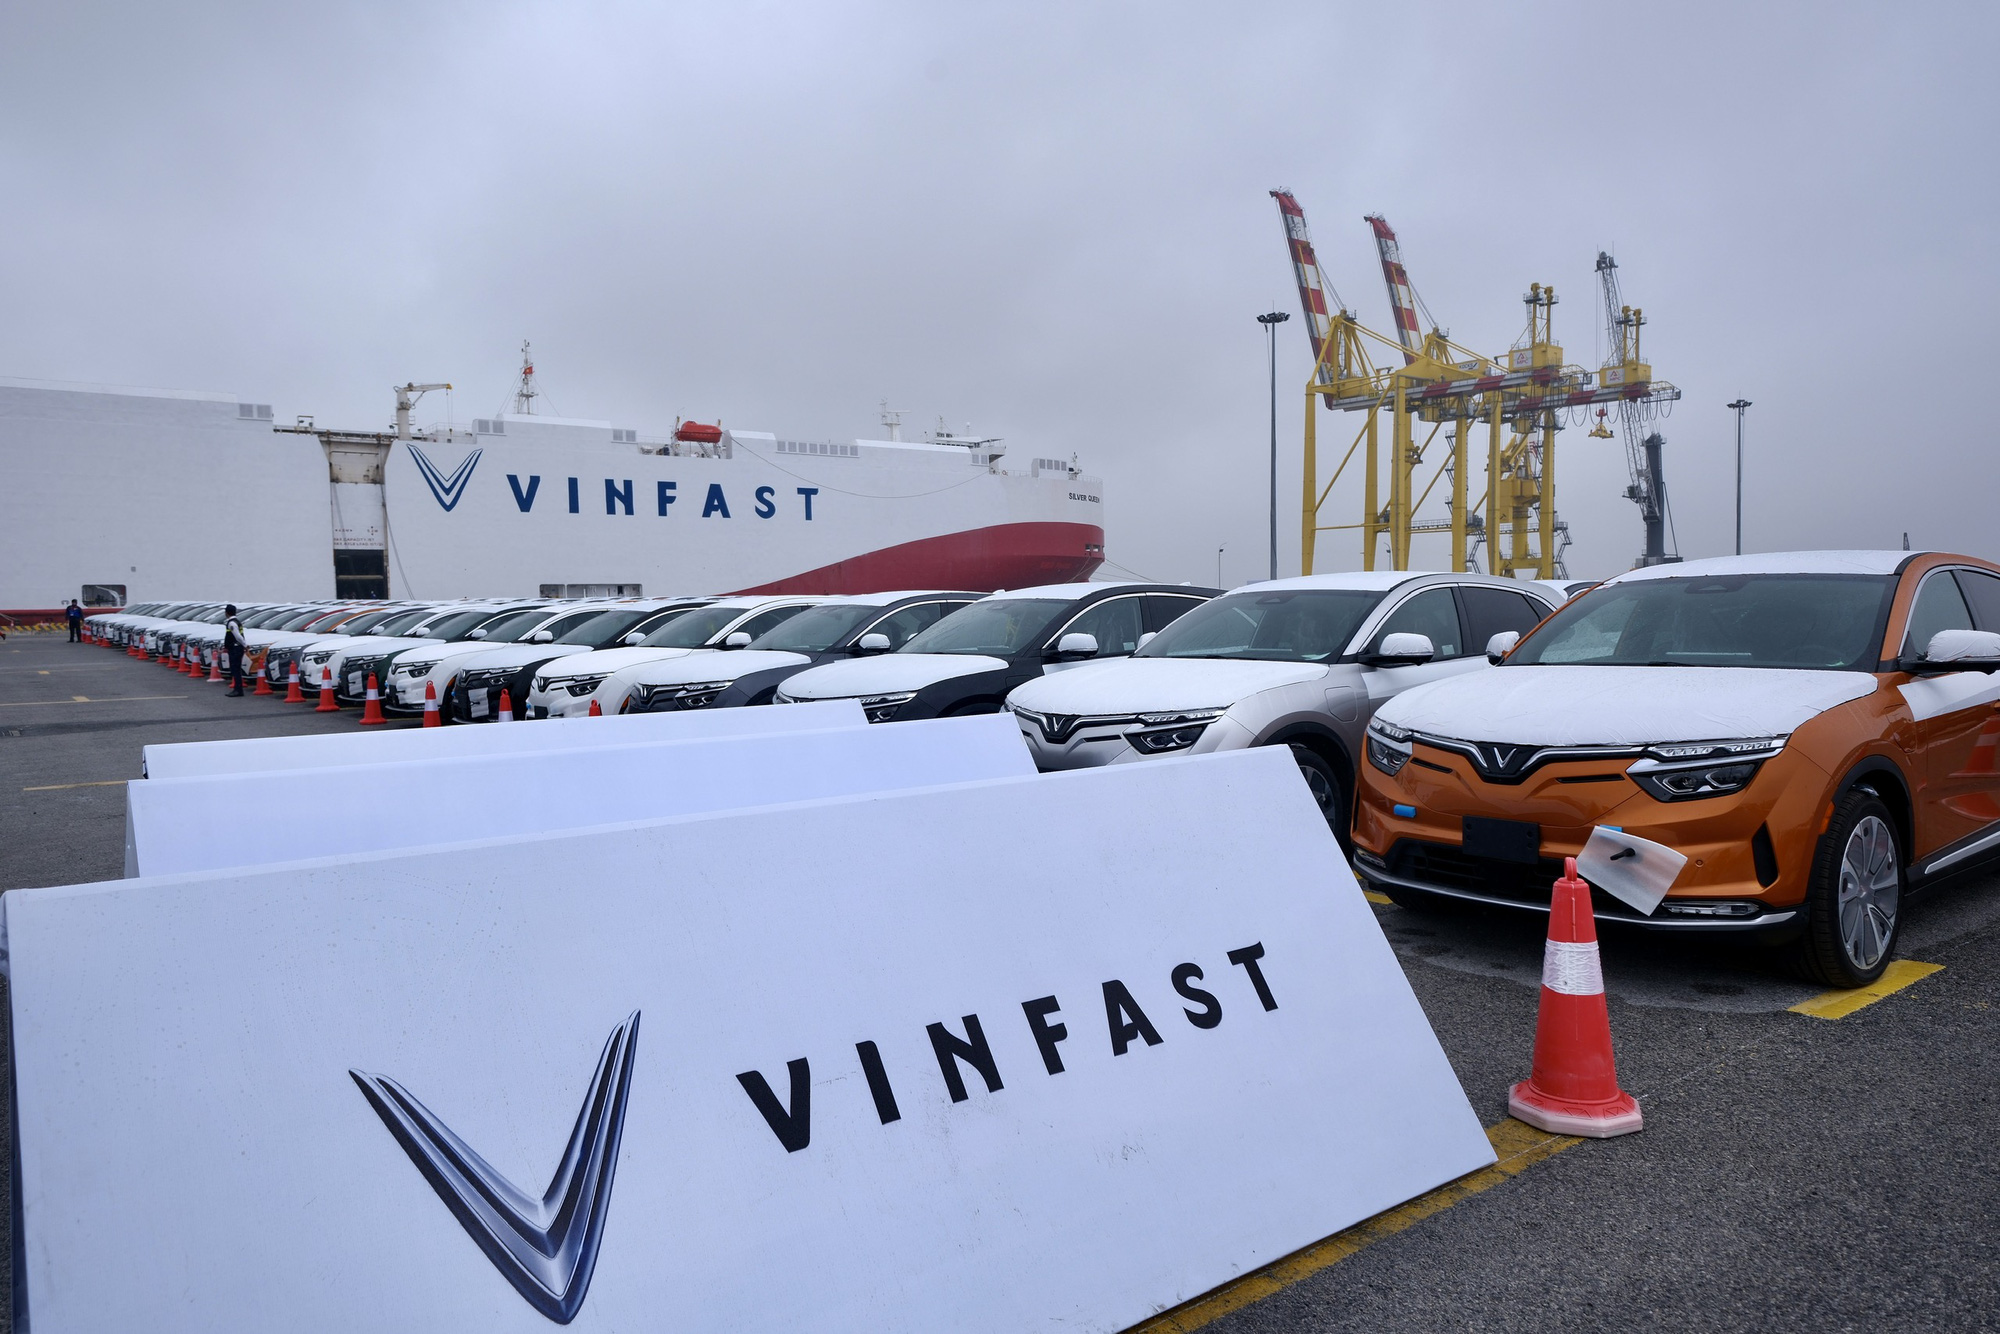 Vietnam’s trade ministry seeking feedback on VinFast battery cell production project